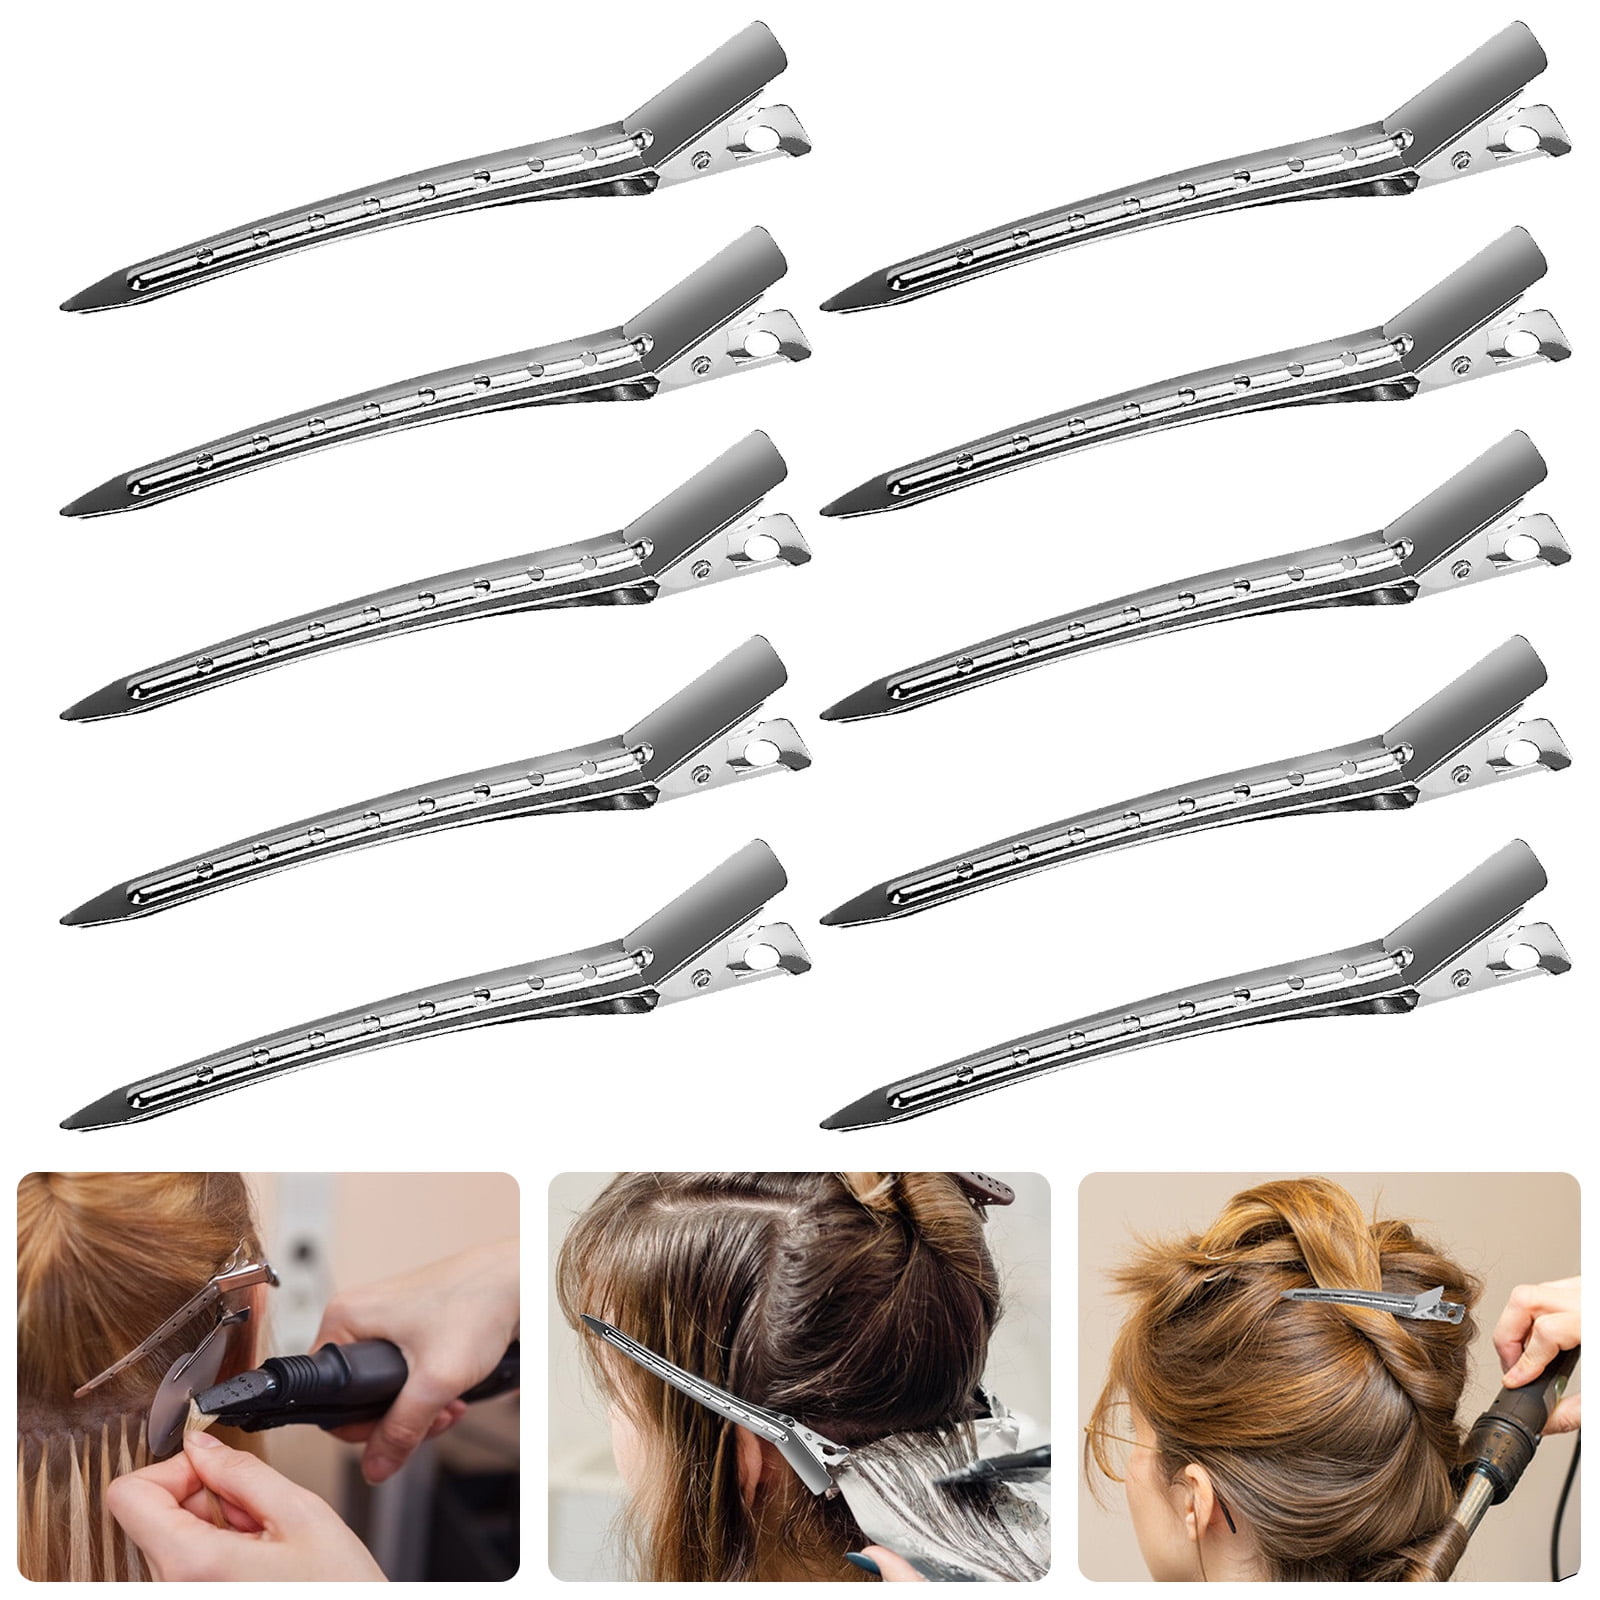 24/12pcs Professional Hair Sectioning Clips, EEEkit Silver Metal Hair Clips  for Women, Alligator Hair Clips for Styling,  Duck Bill Clips,  Girls Hair Accessories DIY Hair Salon 